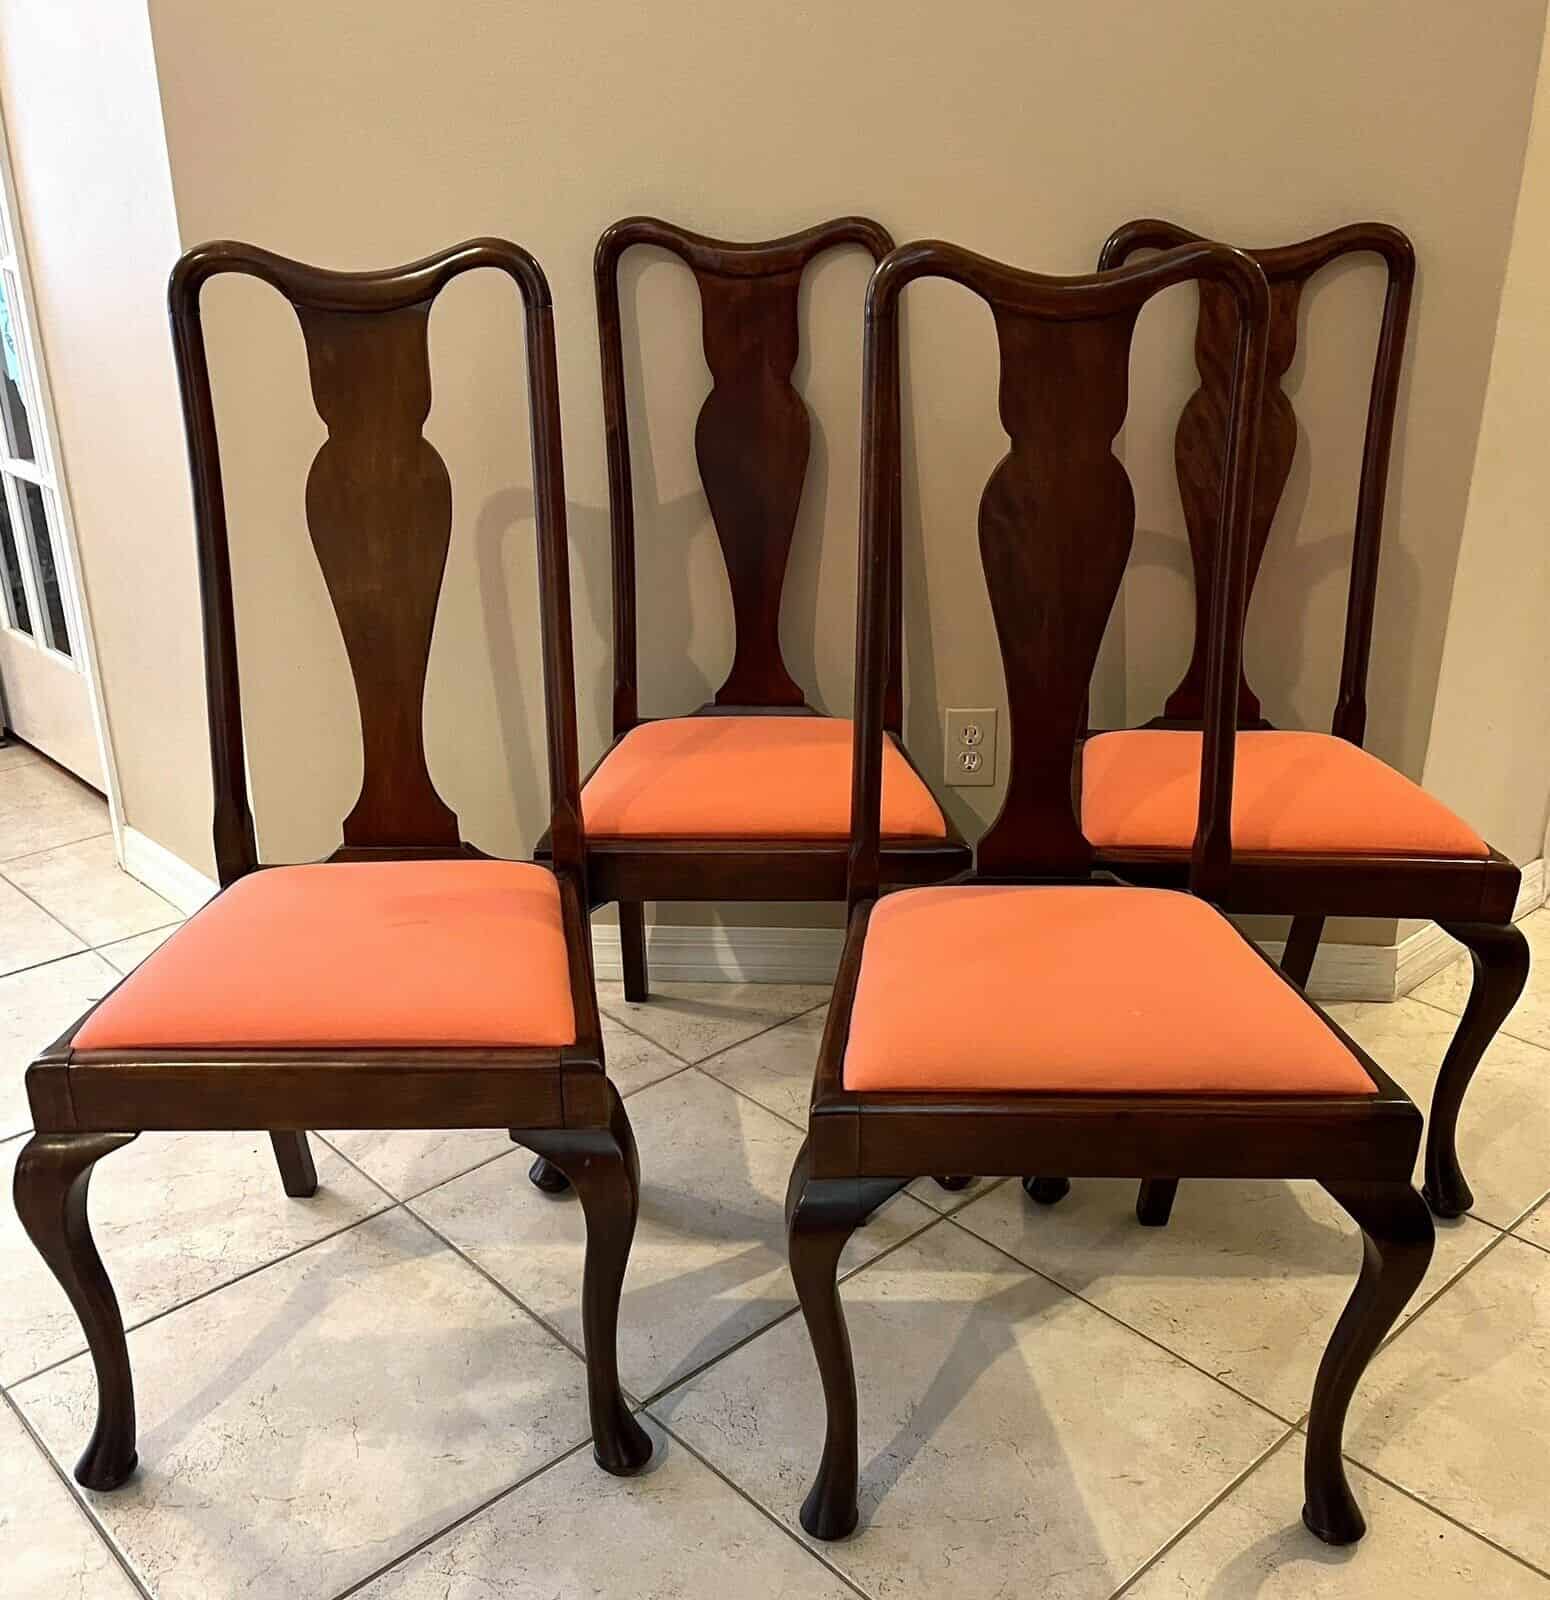 Queen Anne Style Dining Chairs, Set of 4 - Circa. 1920